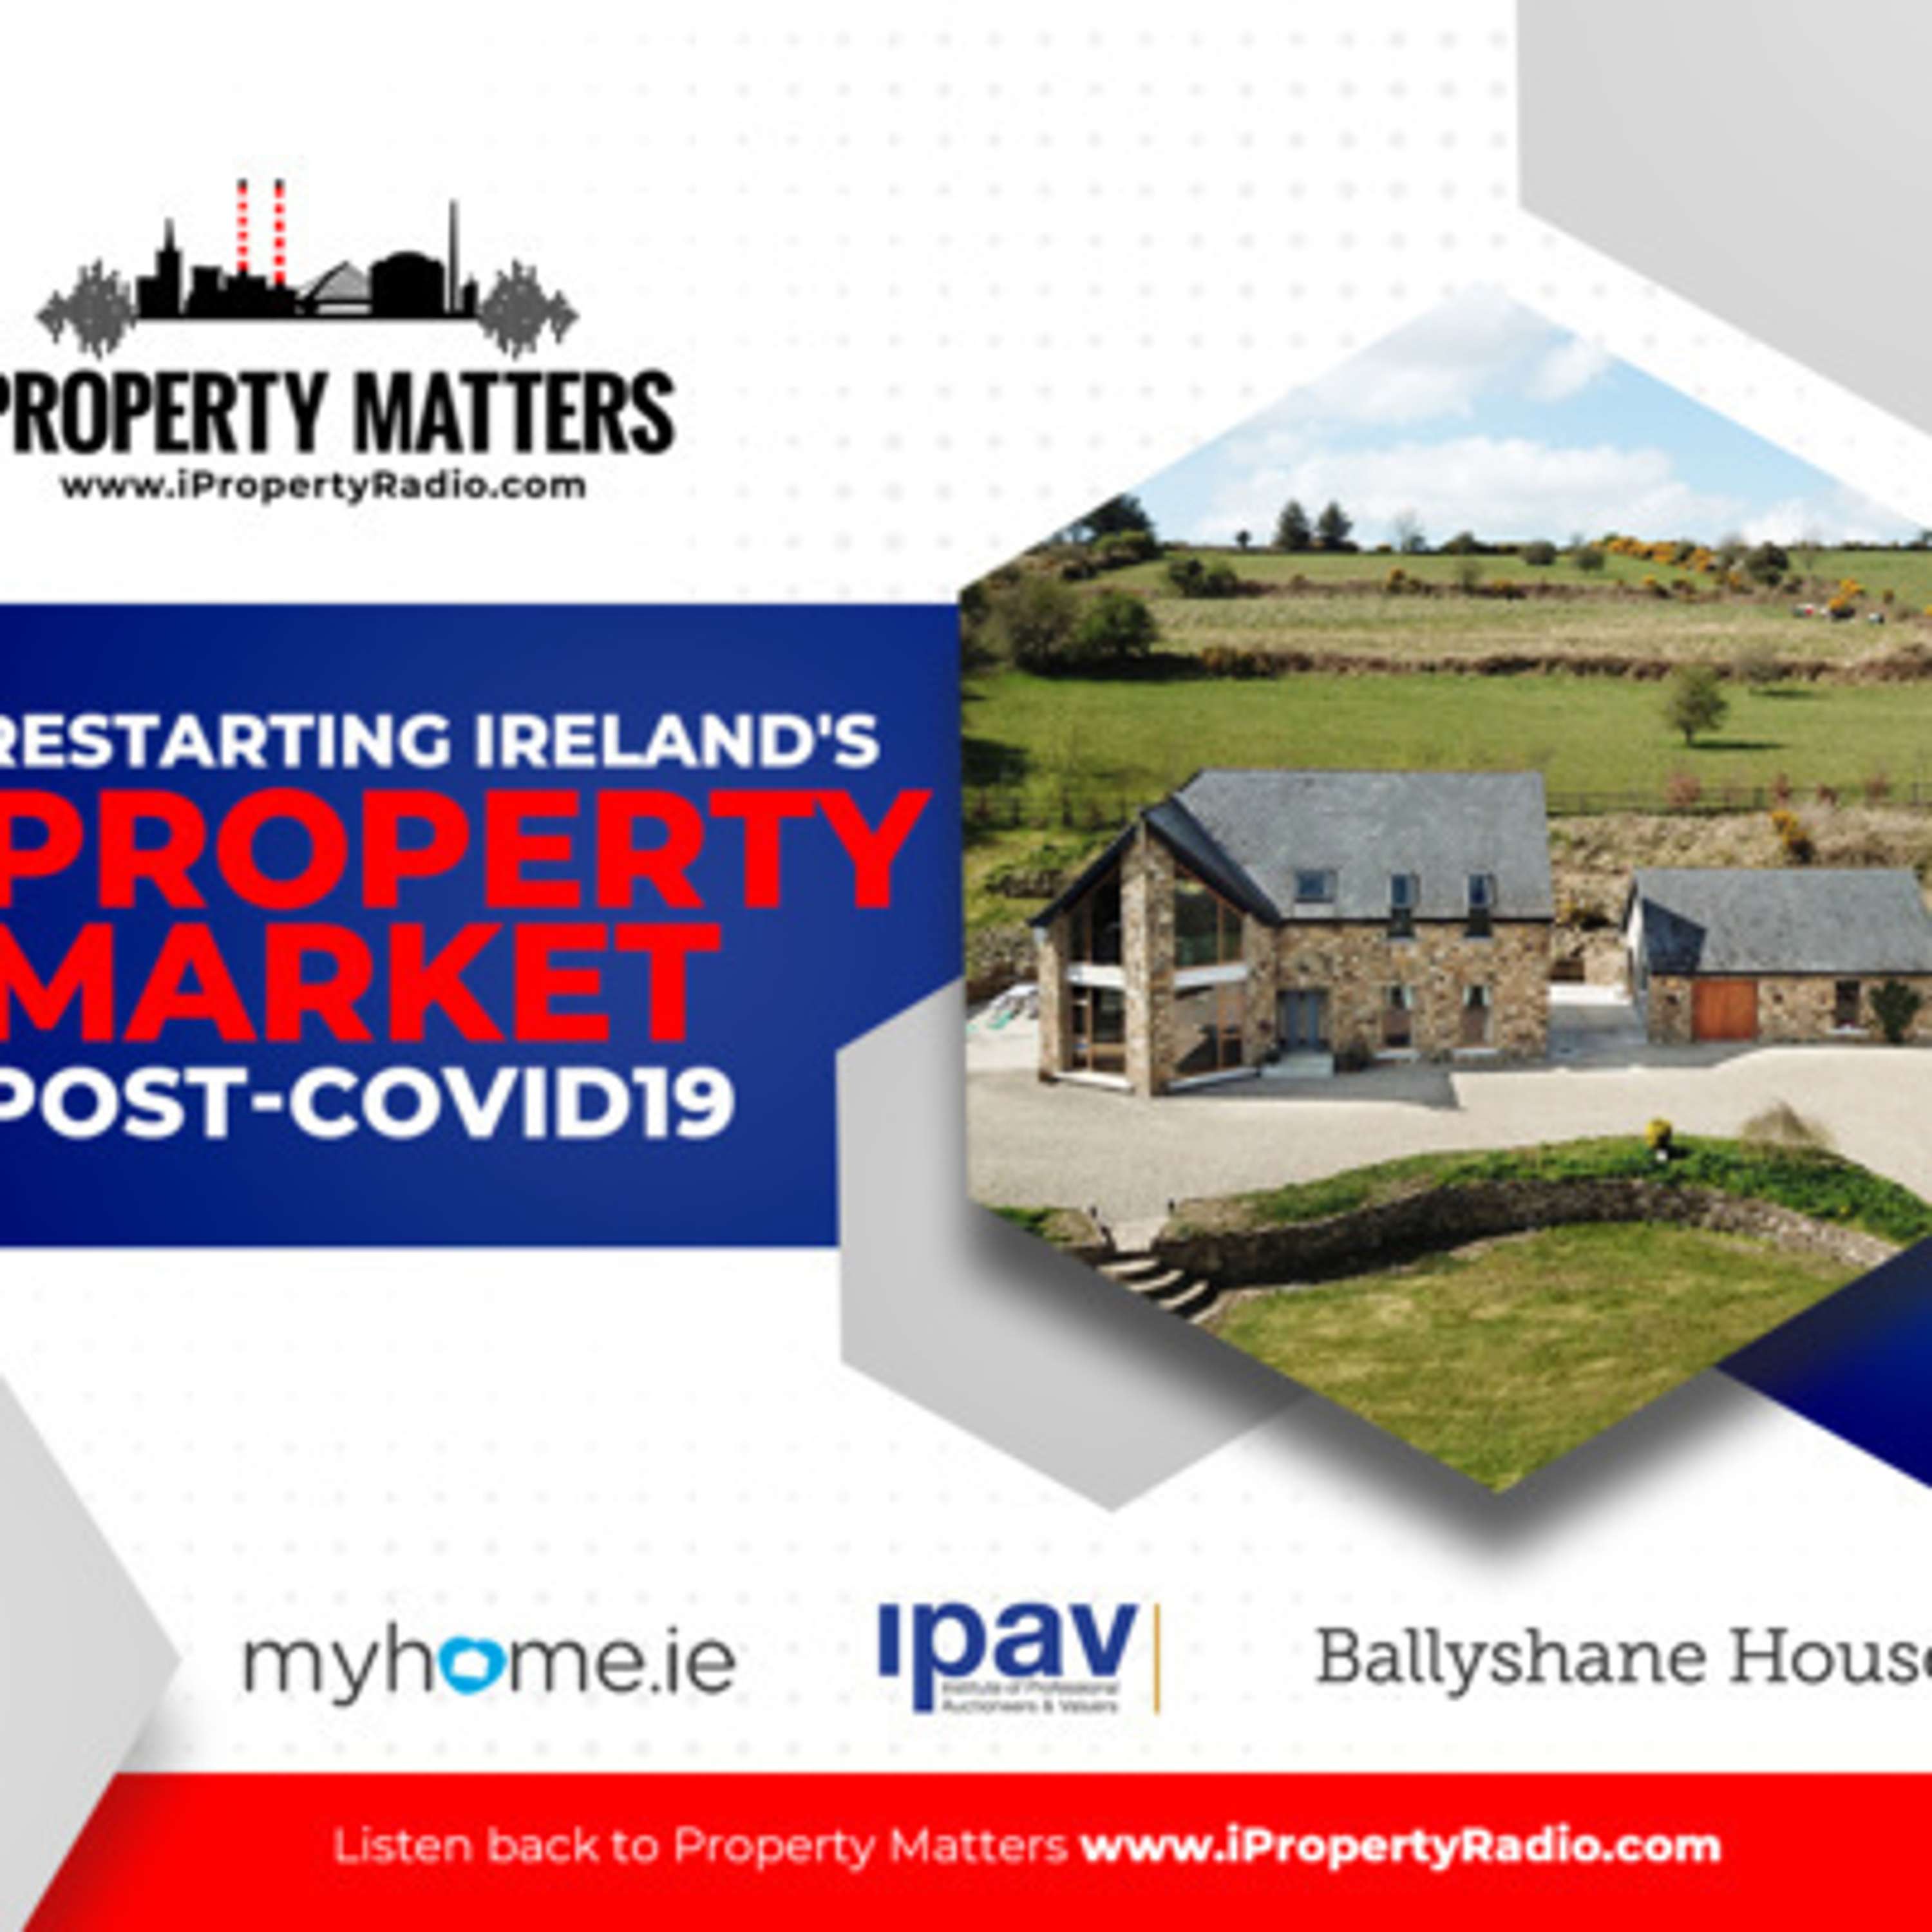 Ep.65 Property Matters, 26th May 2020: New safety protocols for estate agents, Ballyshane House and world-leading proptech from MyHome.ie